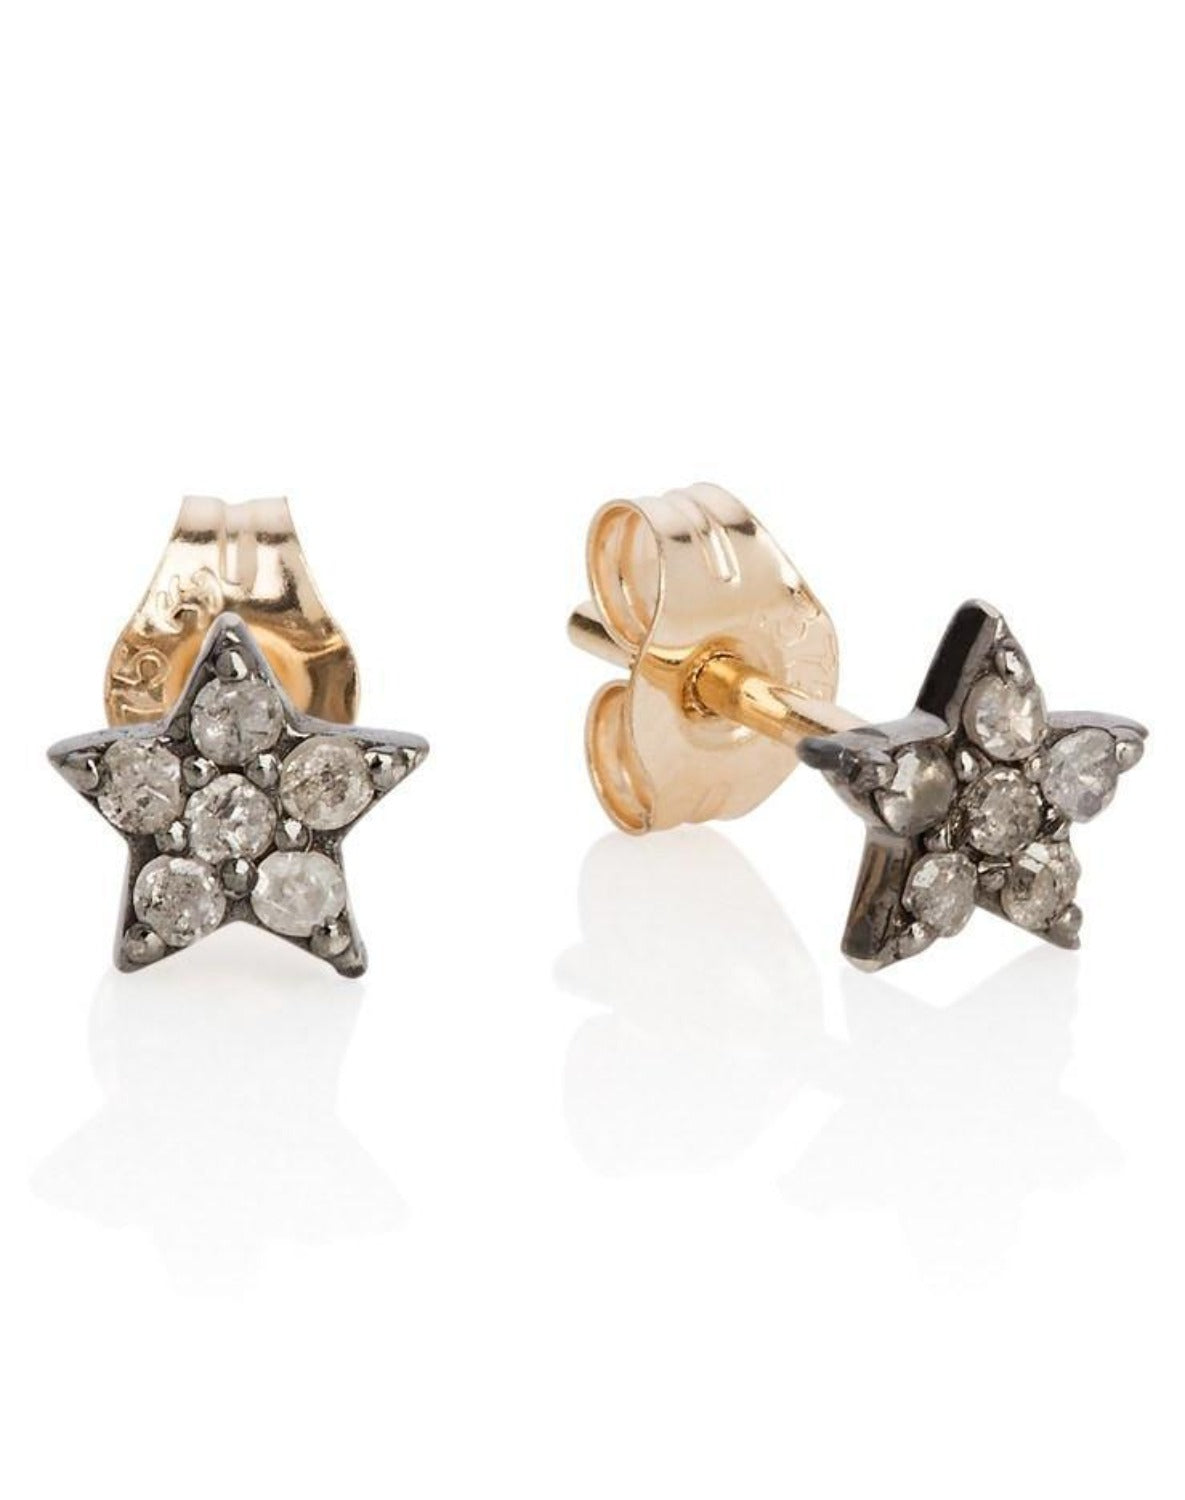 Laura Lee oxidised silver diamond set star stud earrings with 9ct yellow gold posts and butterfly backs.